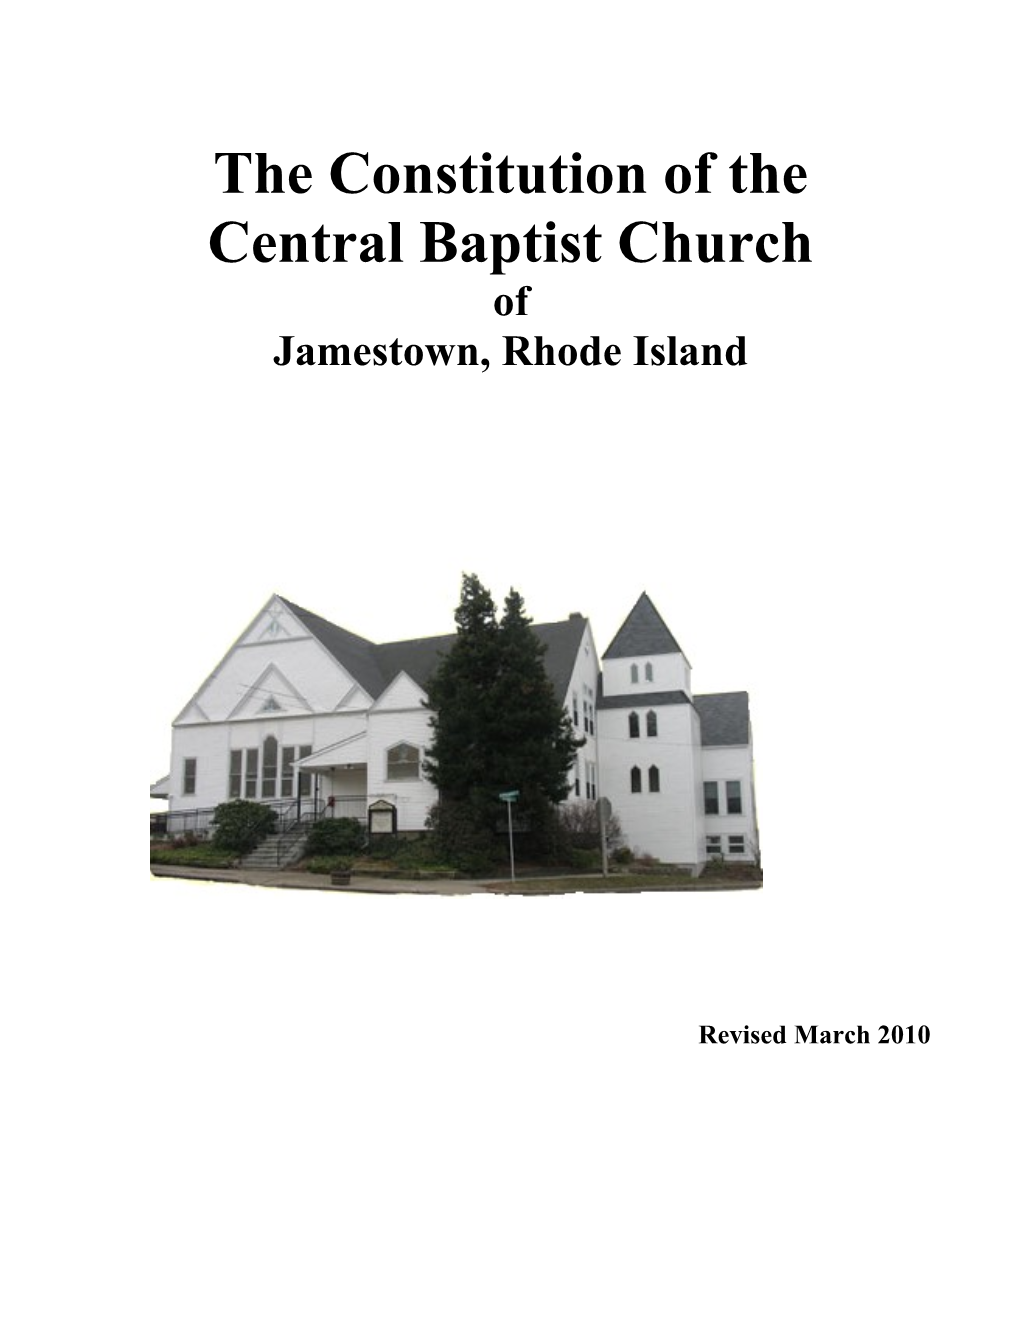 The Constitution of Central Baptist Church